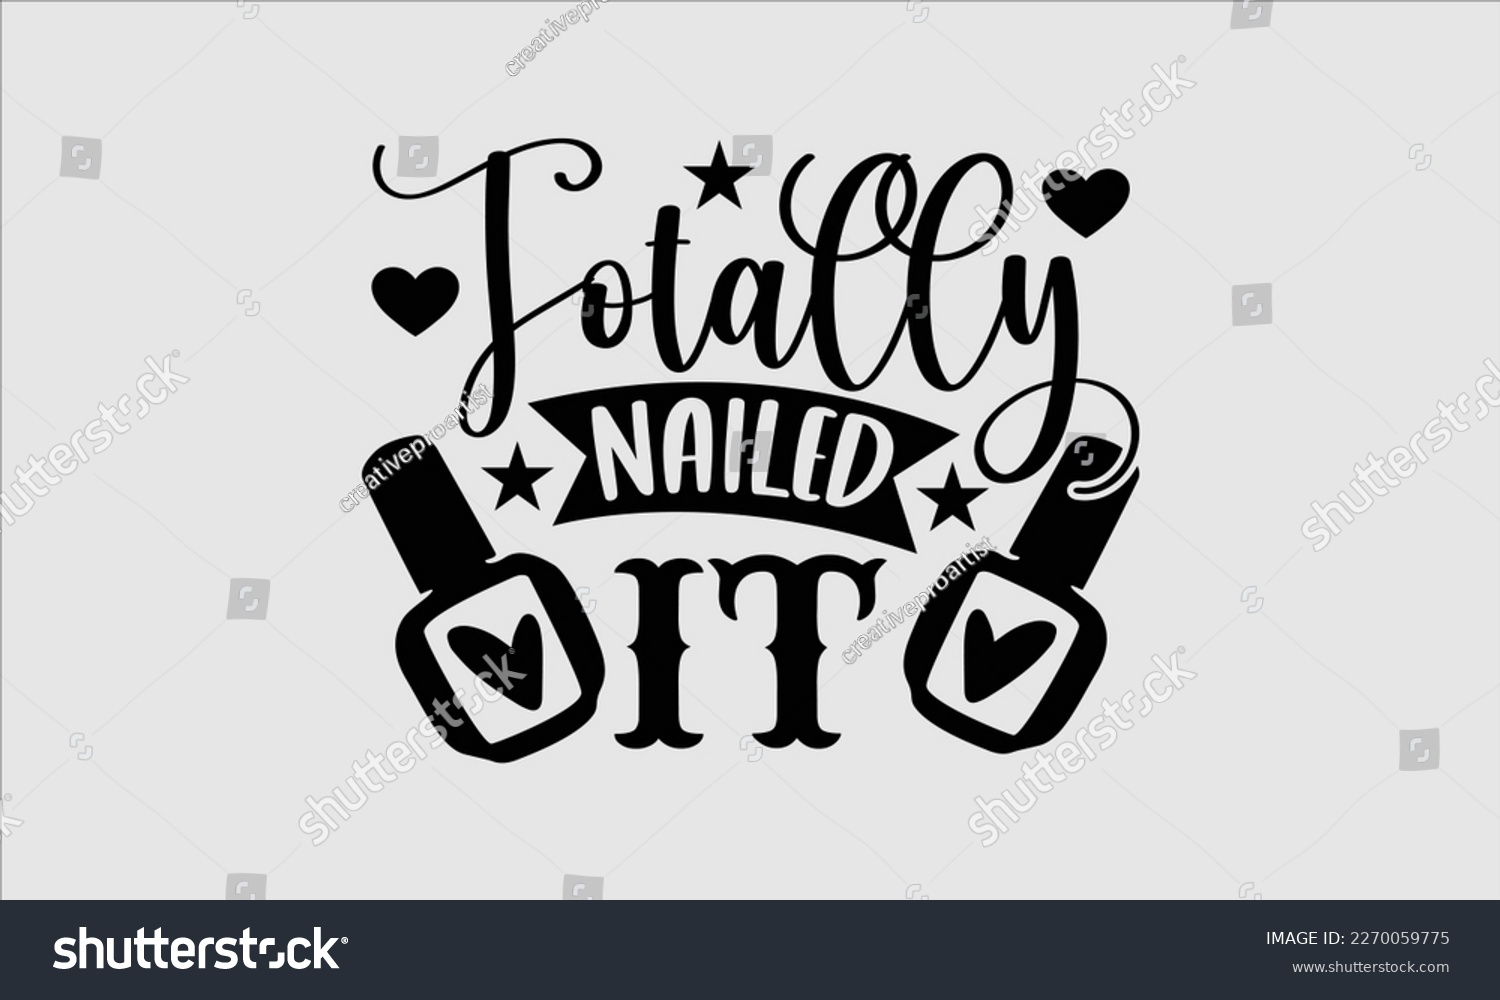 SVG of Totally nailed it- Nail Tech t shirts design, Hand written lettering phrase, Isolated on white background,  Calligraphy graphic for Cutting Machine, svg eps 10. svg